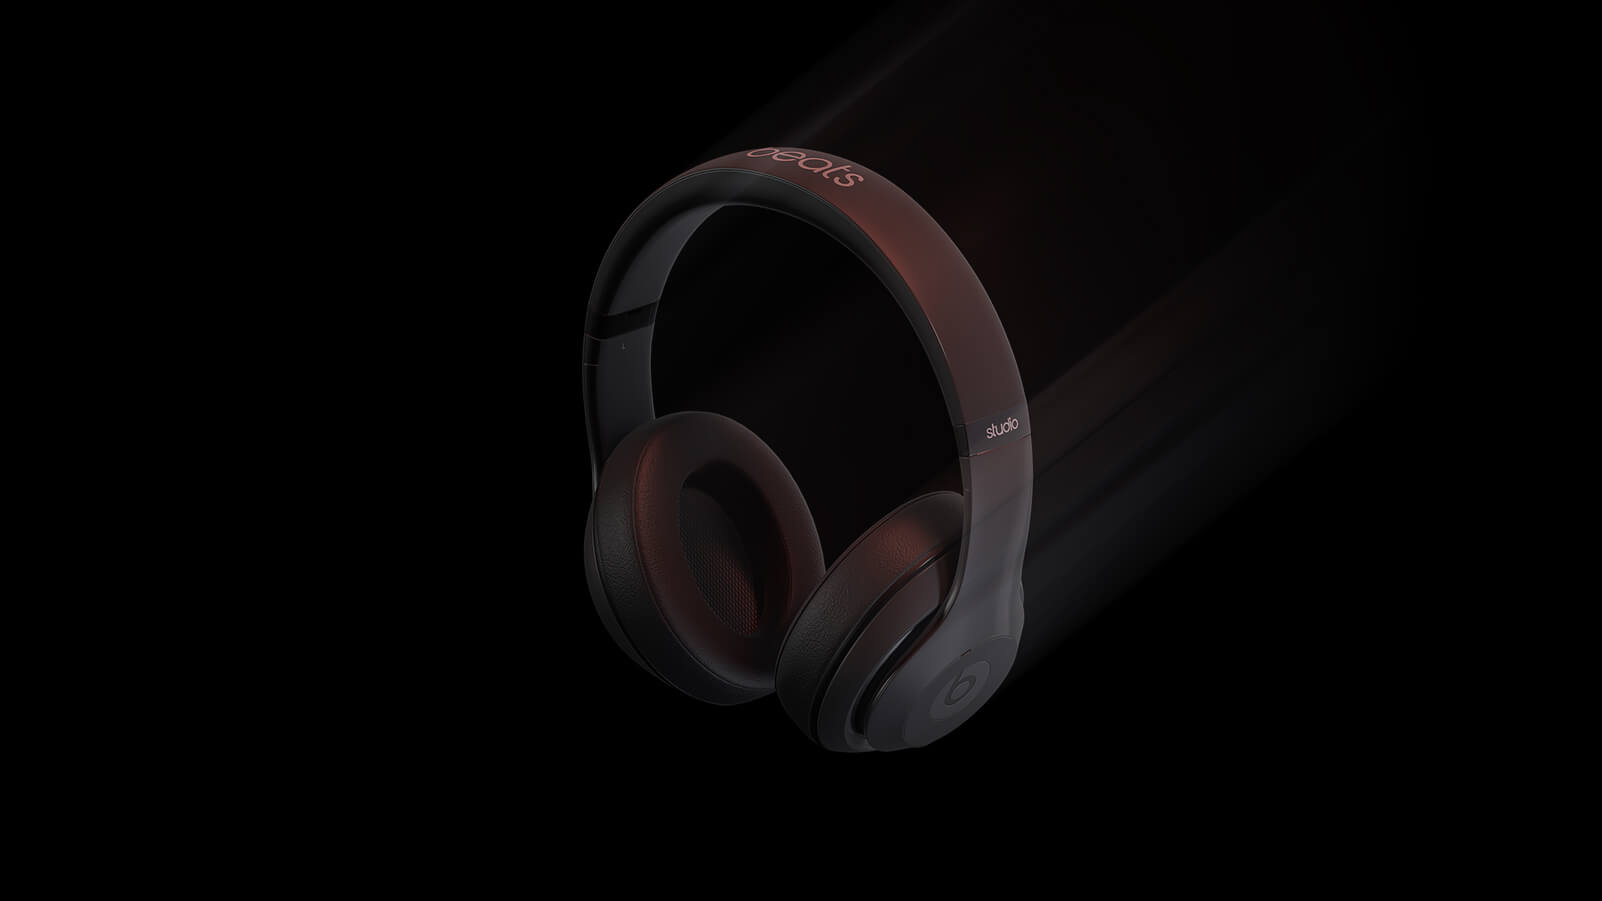 Beats Solo Pro Headphones CGI Created In Unreal Engine 5, rendered with Lumen + Raytracing + Photoshop. By Lee Powers a Multidisciplinary Creative Based in Singapore